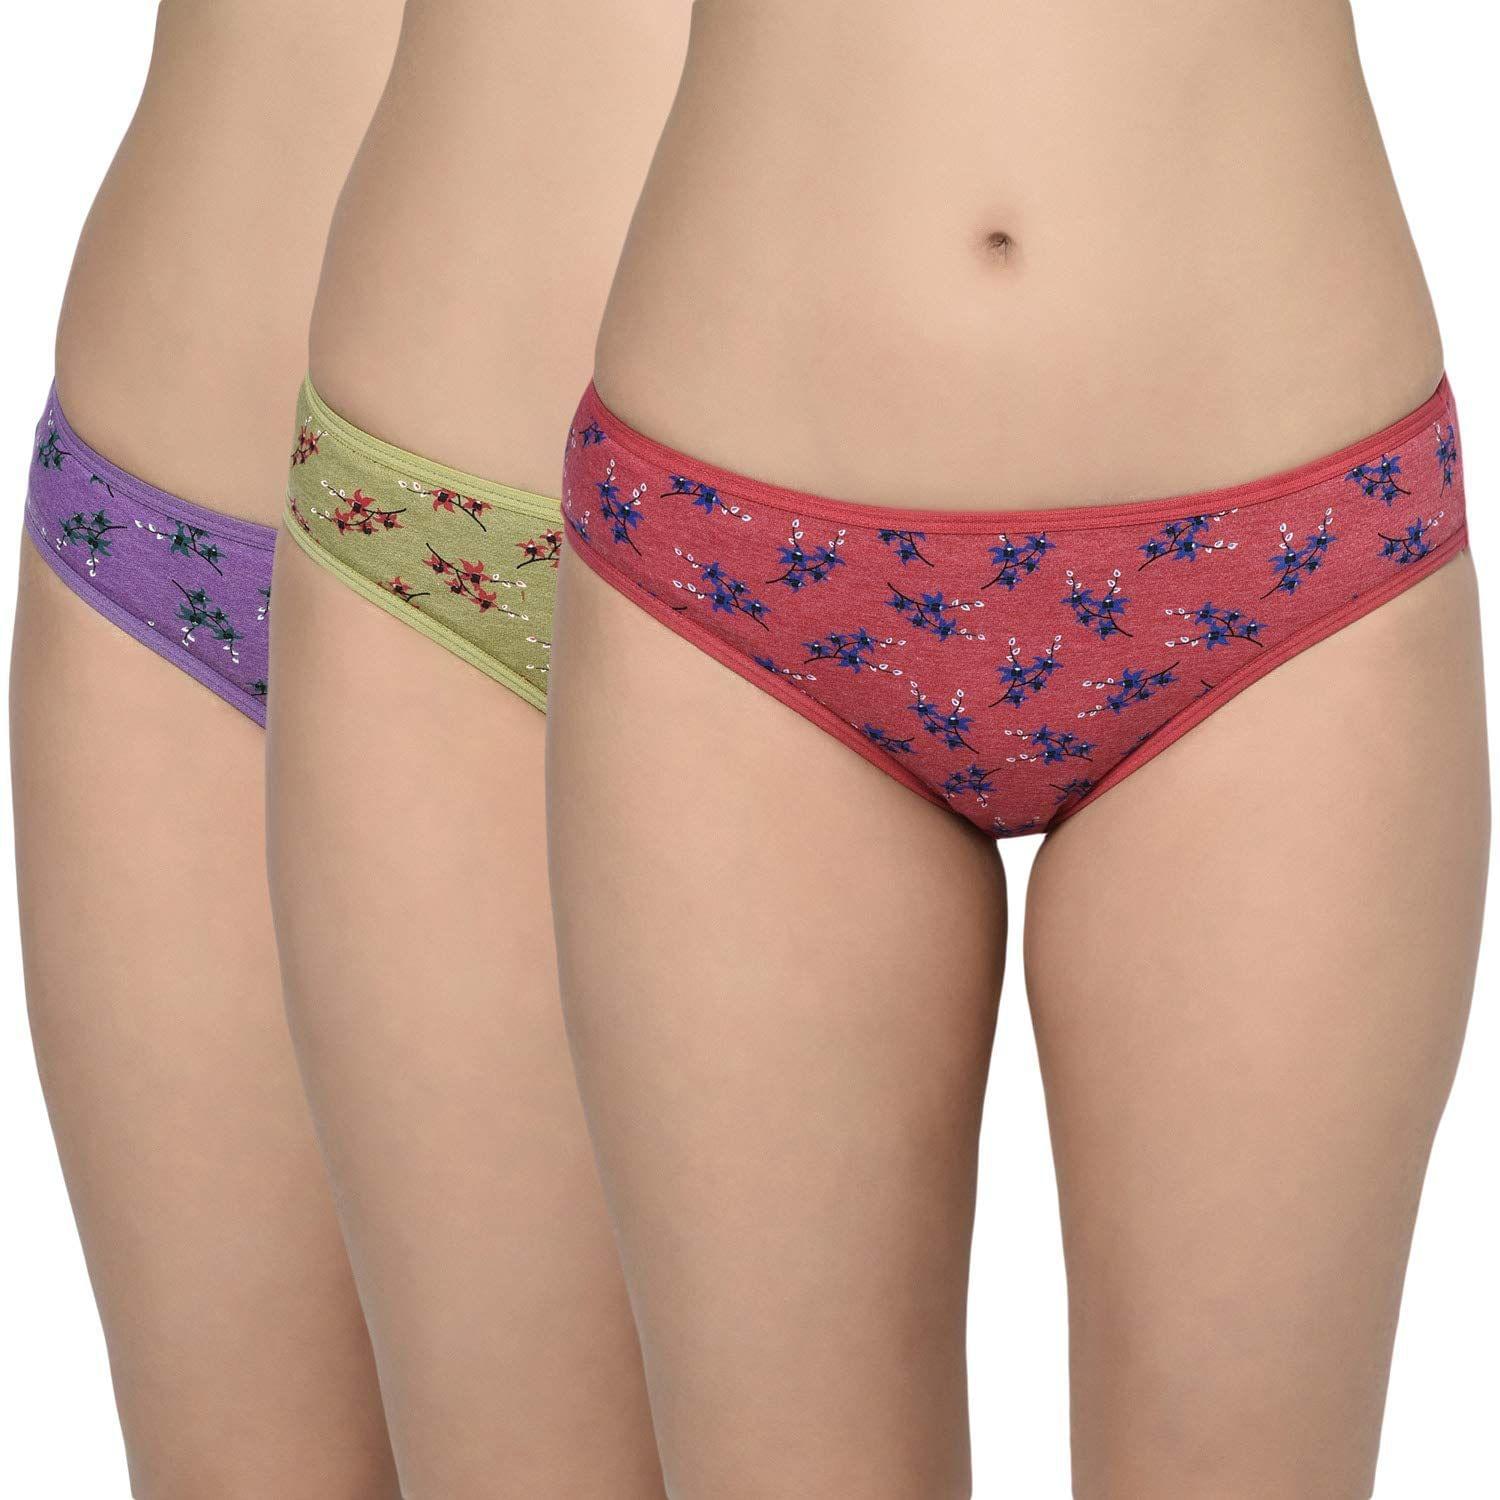 Bodycare Pack Of 3 Printed Panty In Assorted Colors-8516b-3pcs, 8516b-3pcs